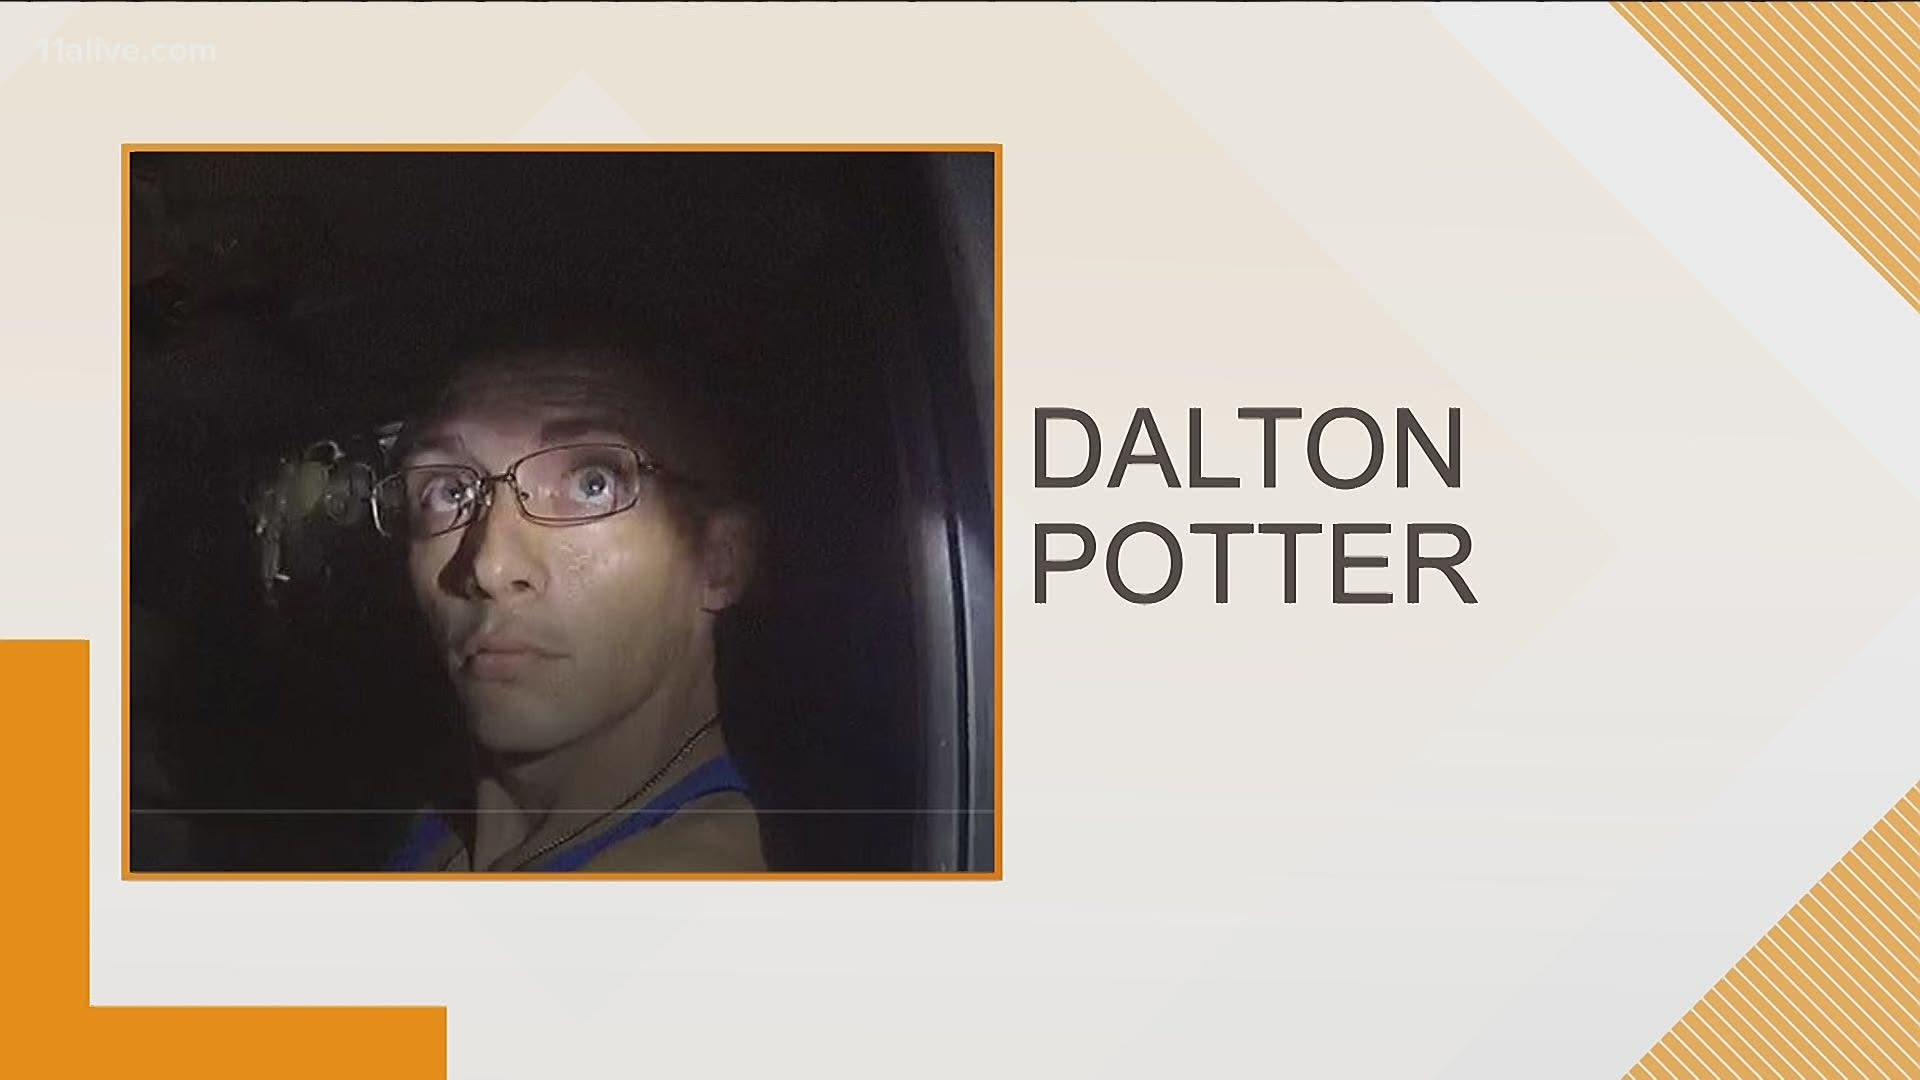 A Blue Alert has been issued for 29-year-old Dalton Lee Potter. He is considered armed and dangerous.